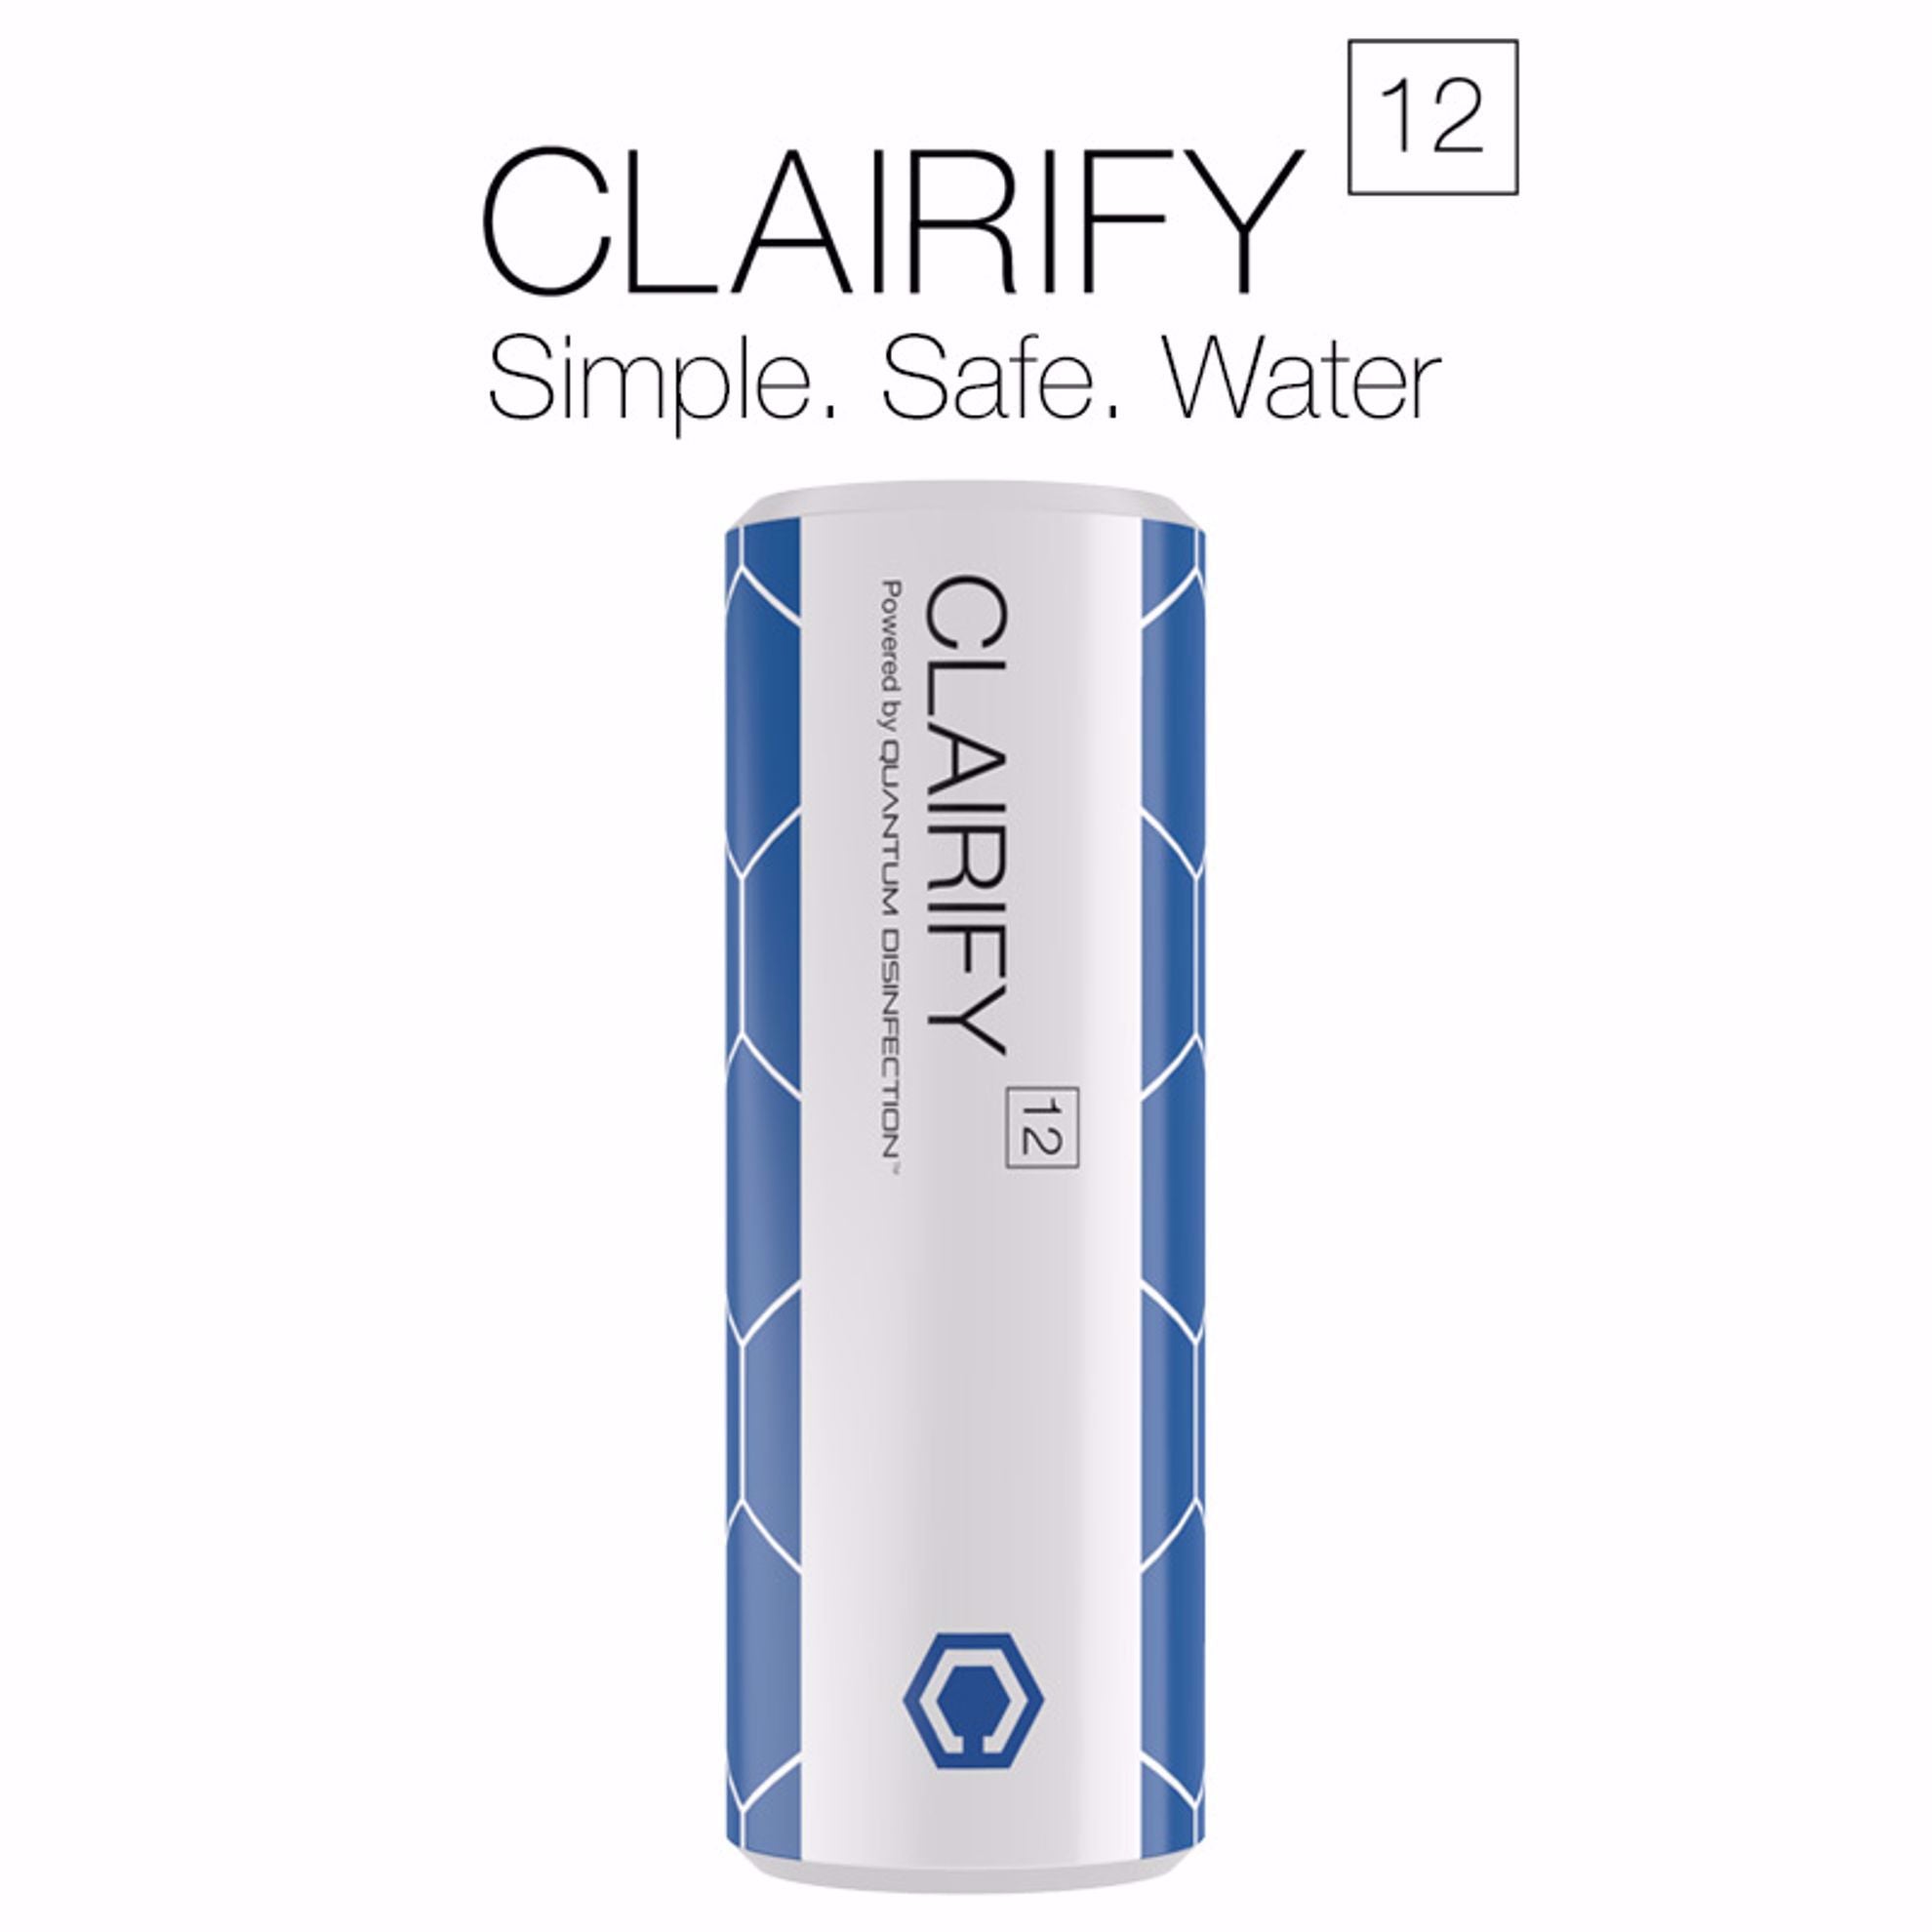 Clairify-12 Disinfection Cartridge